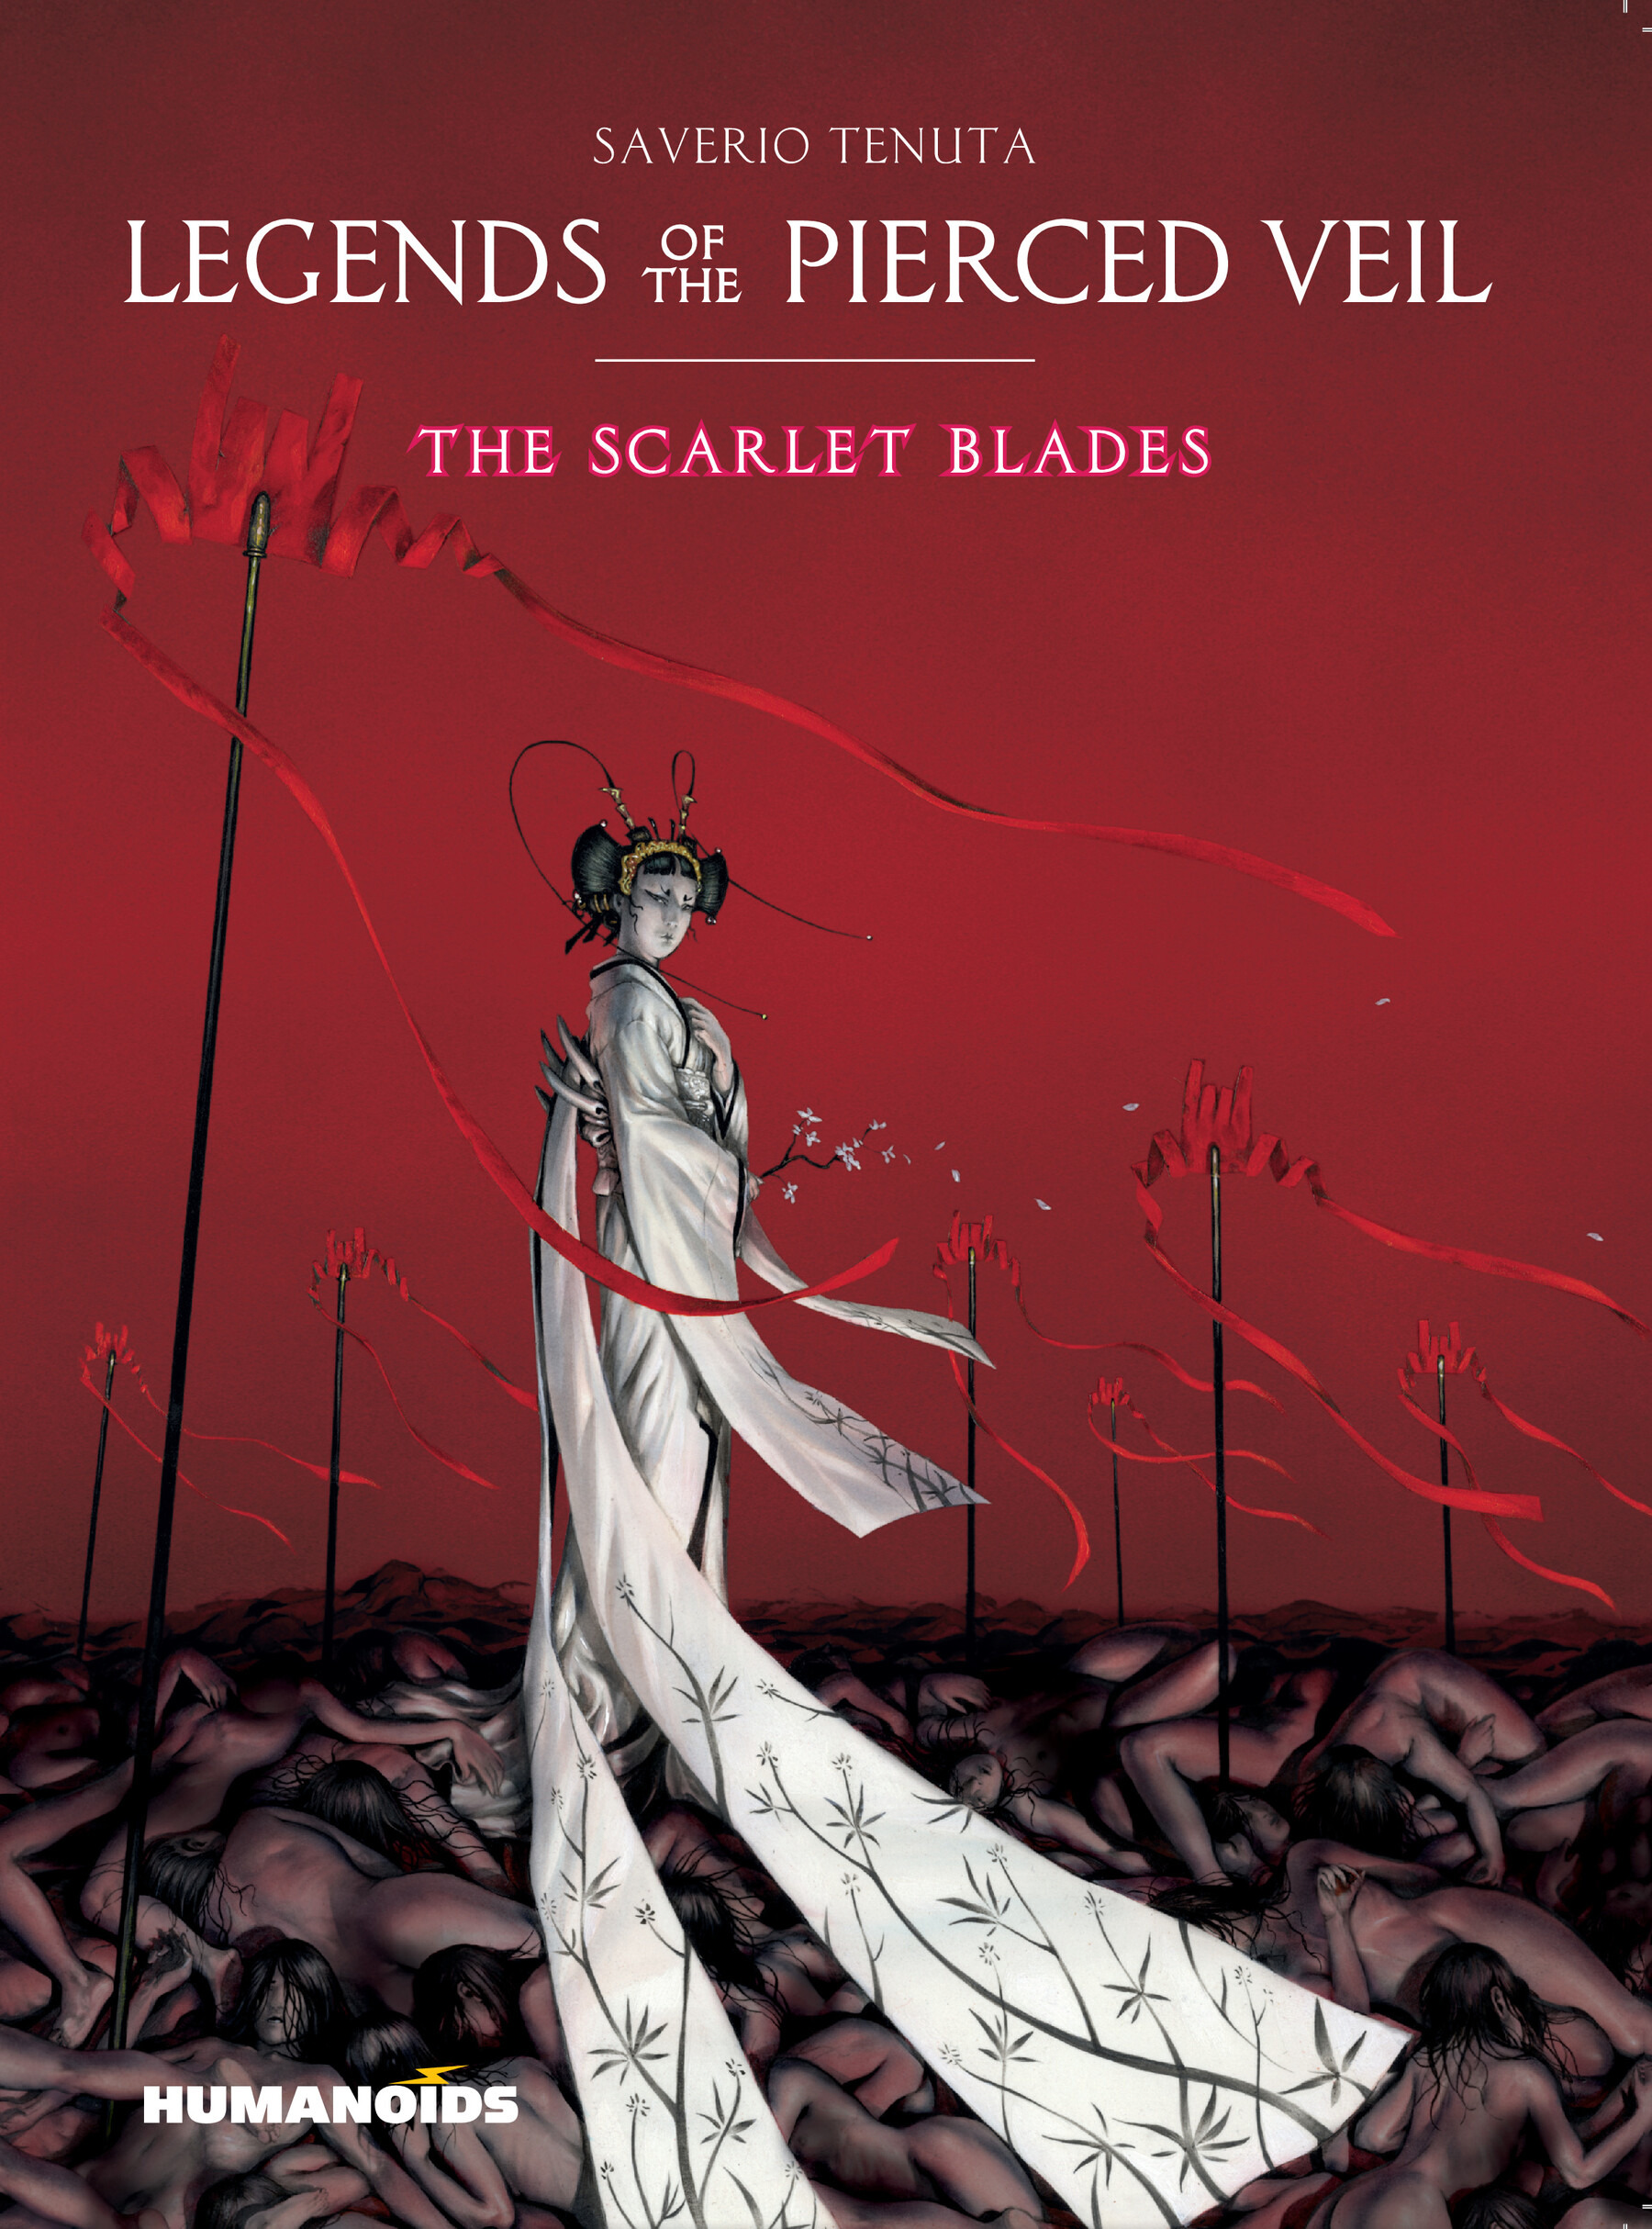 Read online Legends of the Pierced Veil: The Scarlet Blades comic -  Issue # TPB (Part 1) - 1